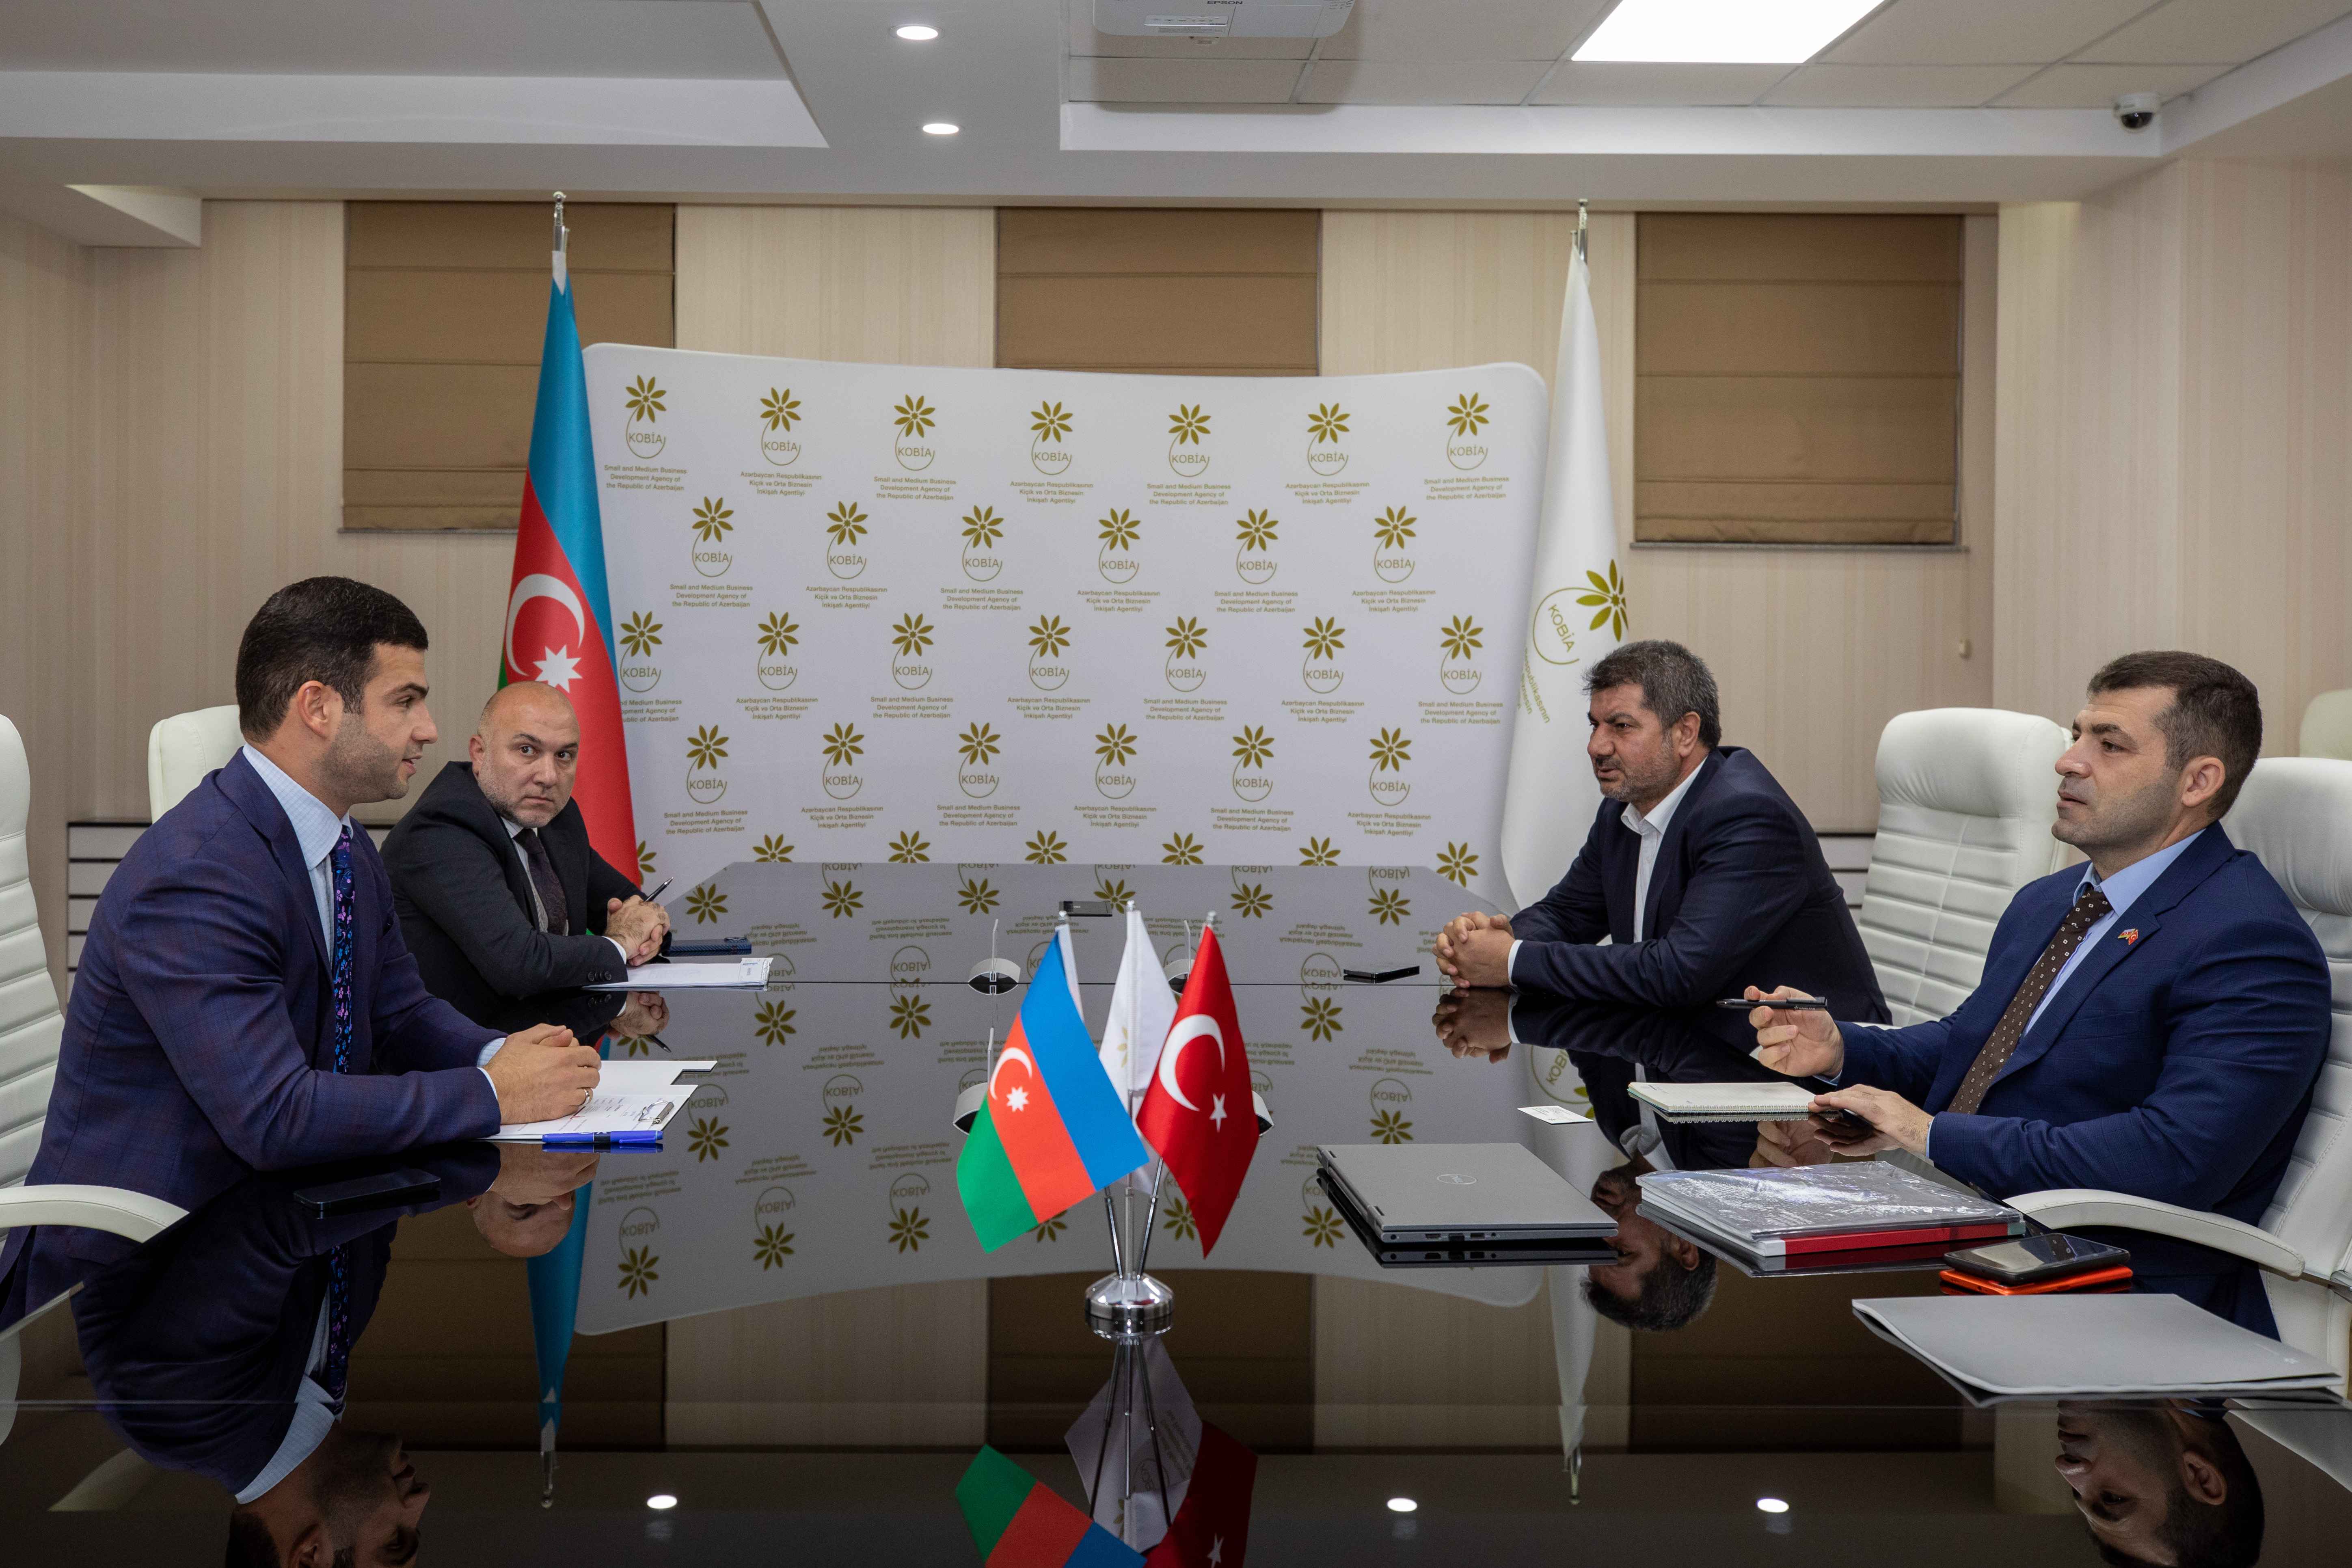 A meeting was held with a Turkish technology company 